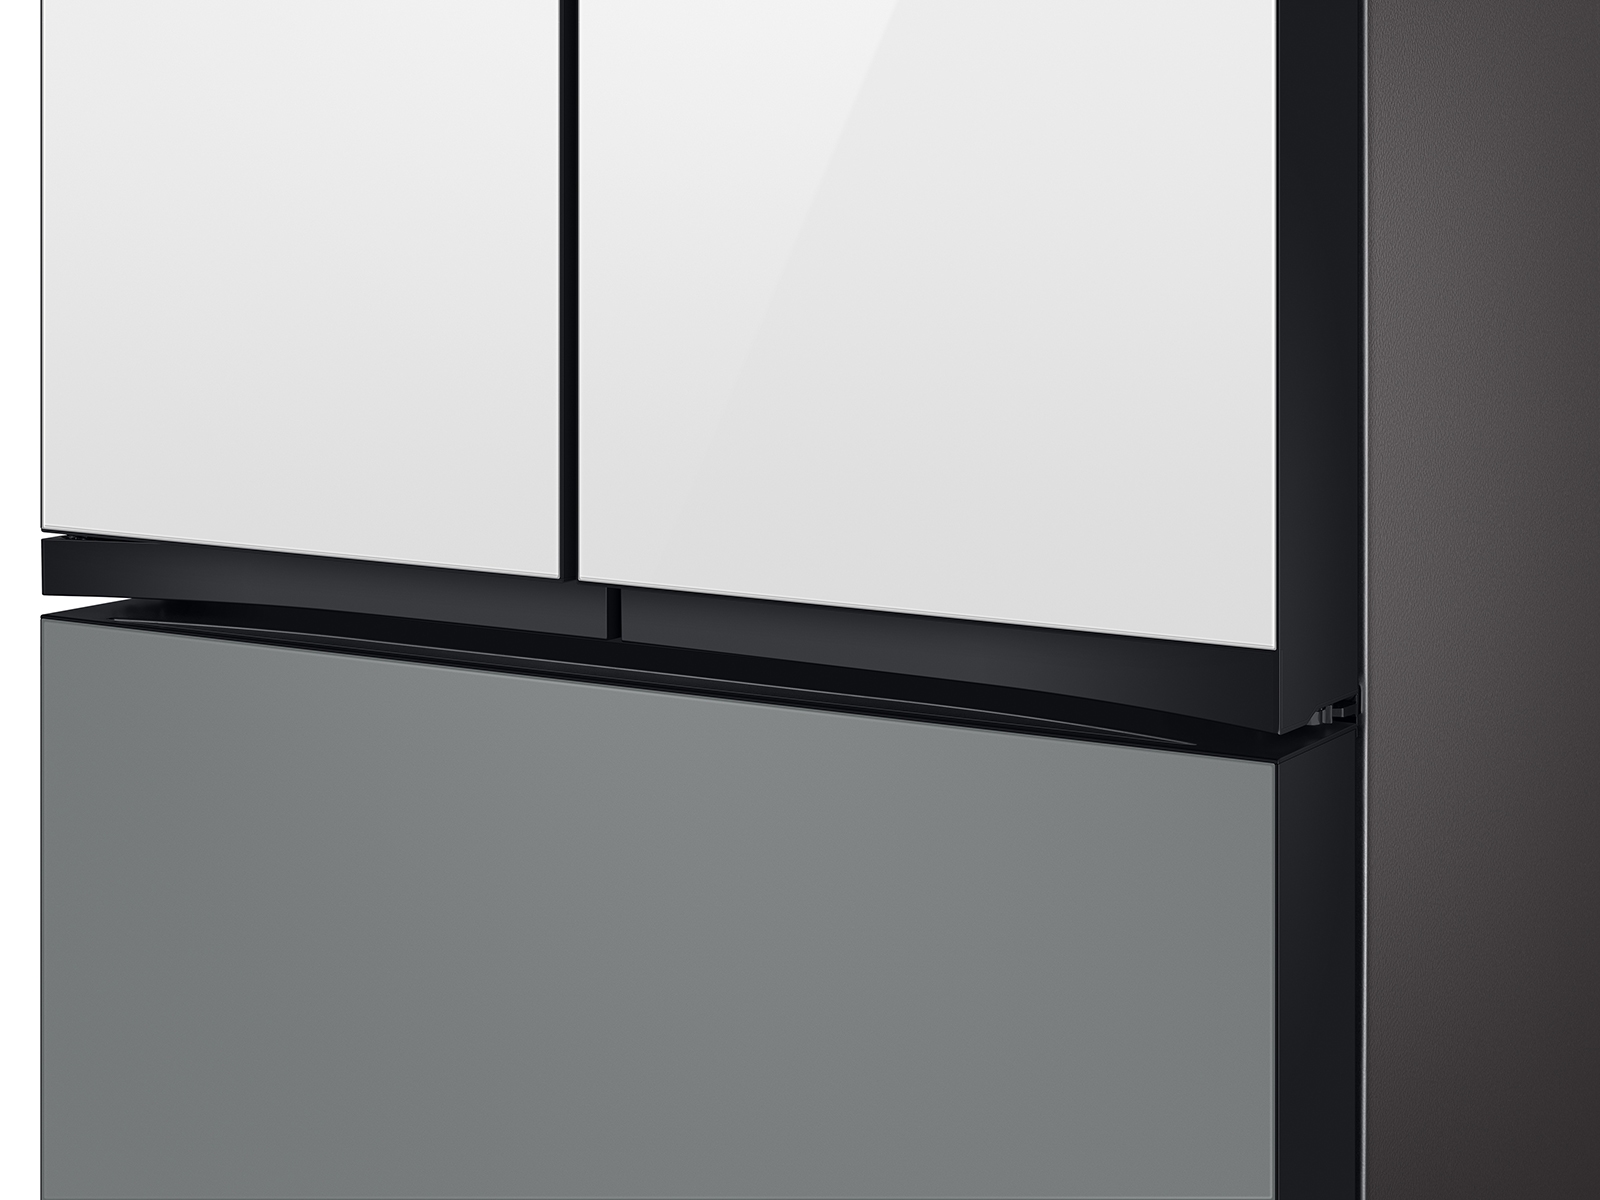 RF24BB69006MAA in Charcoal Glass and Matte Black Steel by Samsung in  Schenectady, NY - Bespoke 3-Door French Door Refrigerator (24 cu. ft.) -  with Top Left and Family Hub™ Panel in White